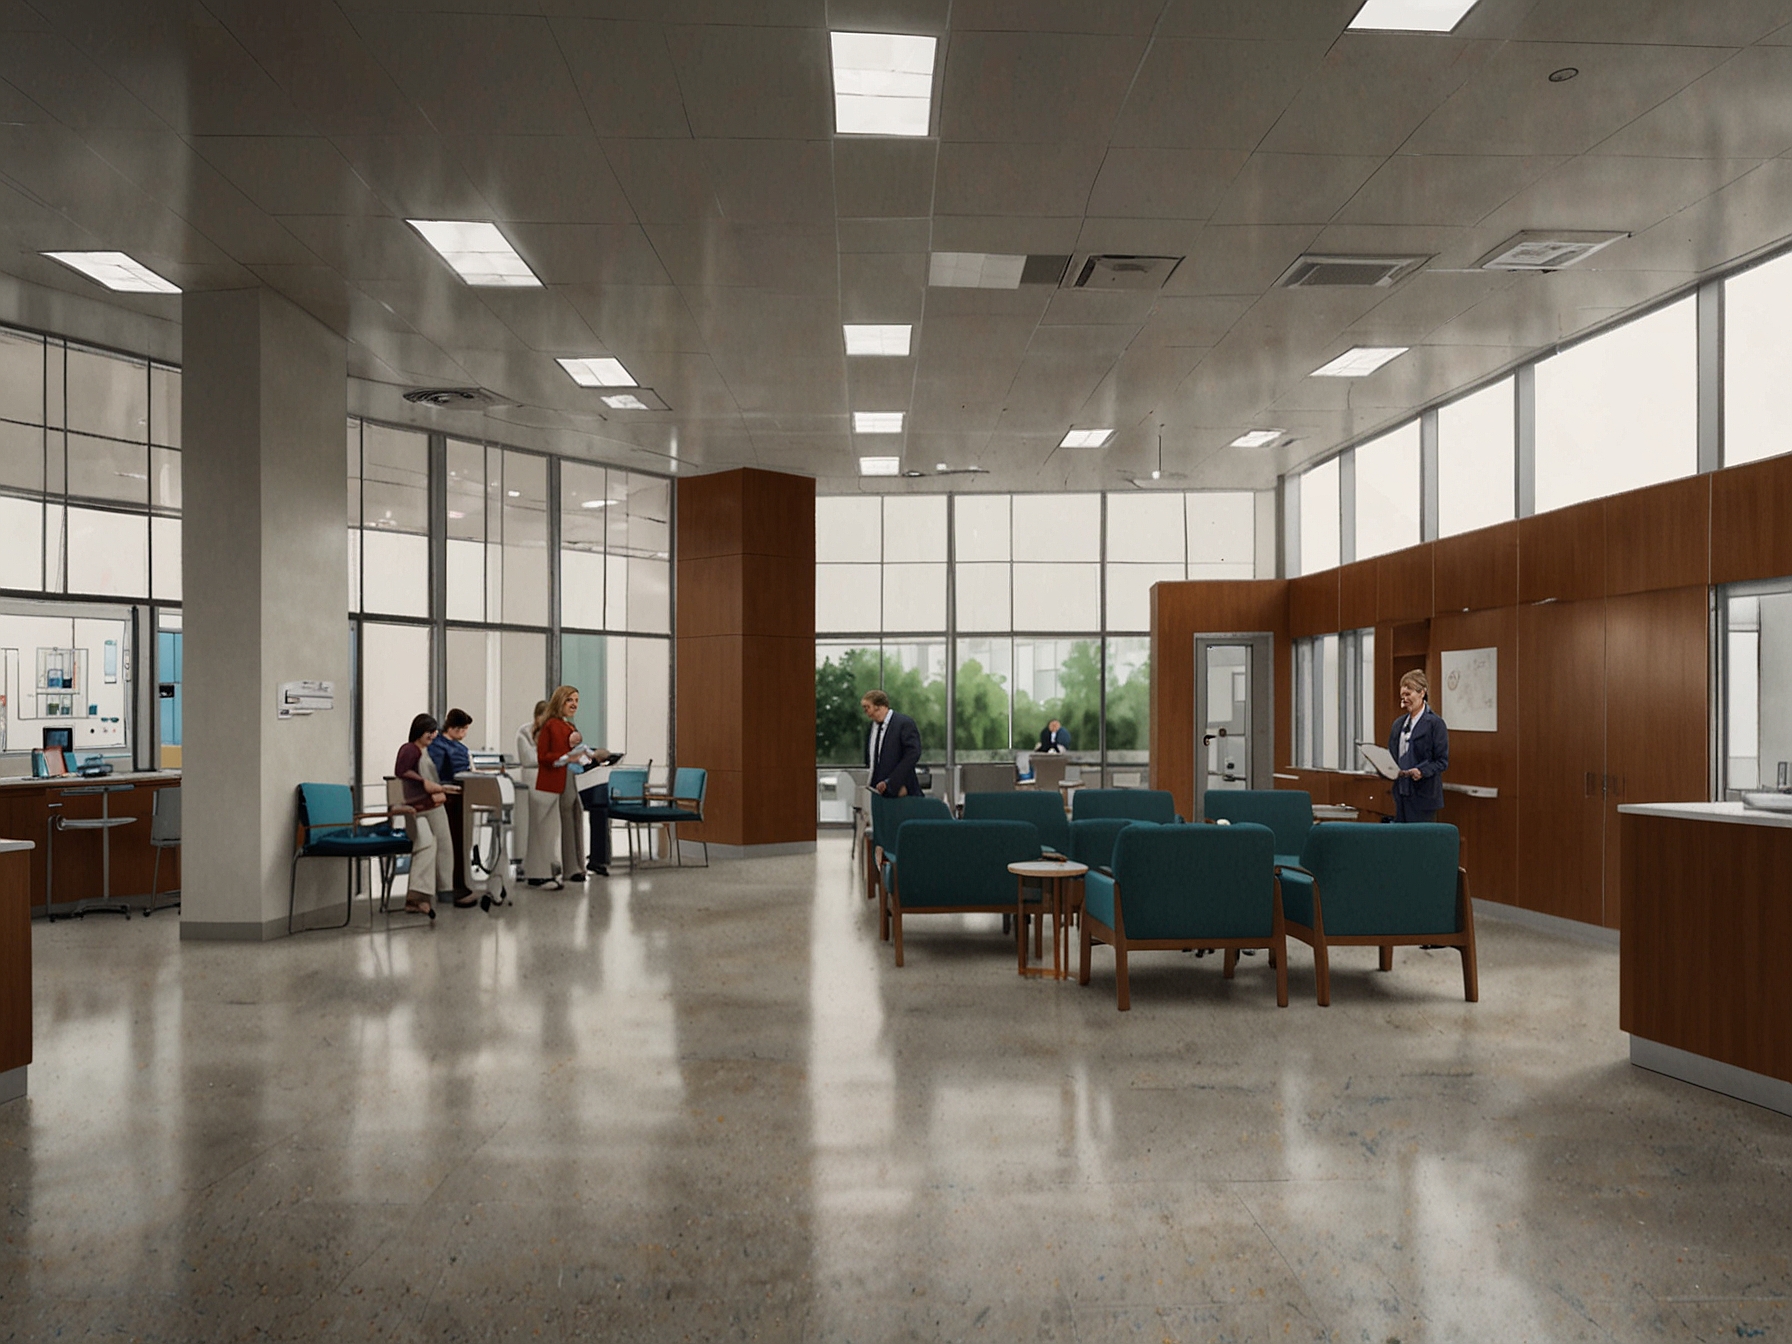 A modern ambulatory care service center, representing Tenet's focus on high-growth healthcare segments that are anticipated to drive the company's profitability and operational efficiency.